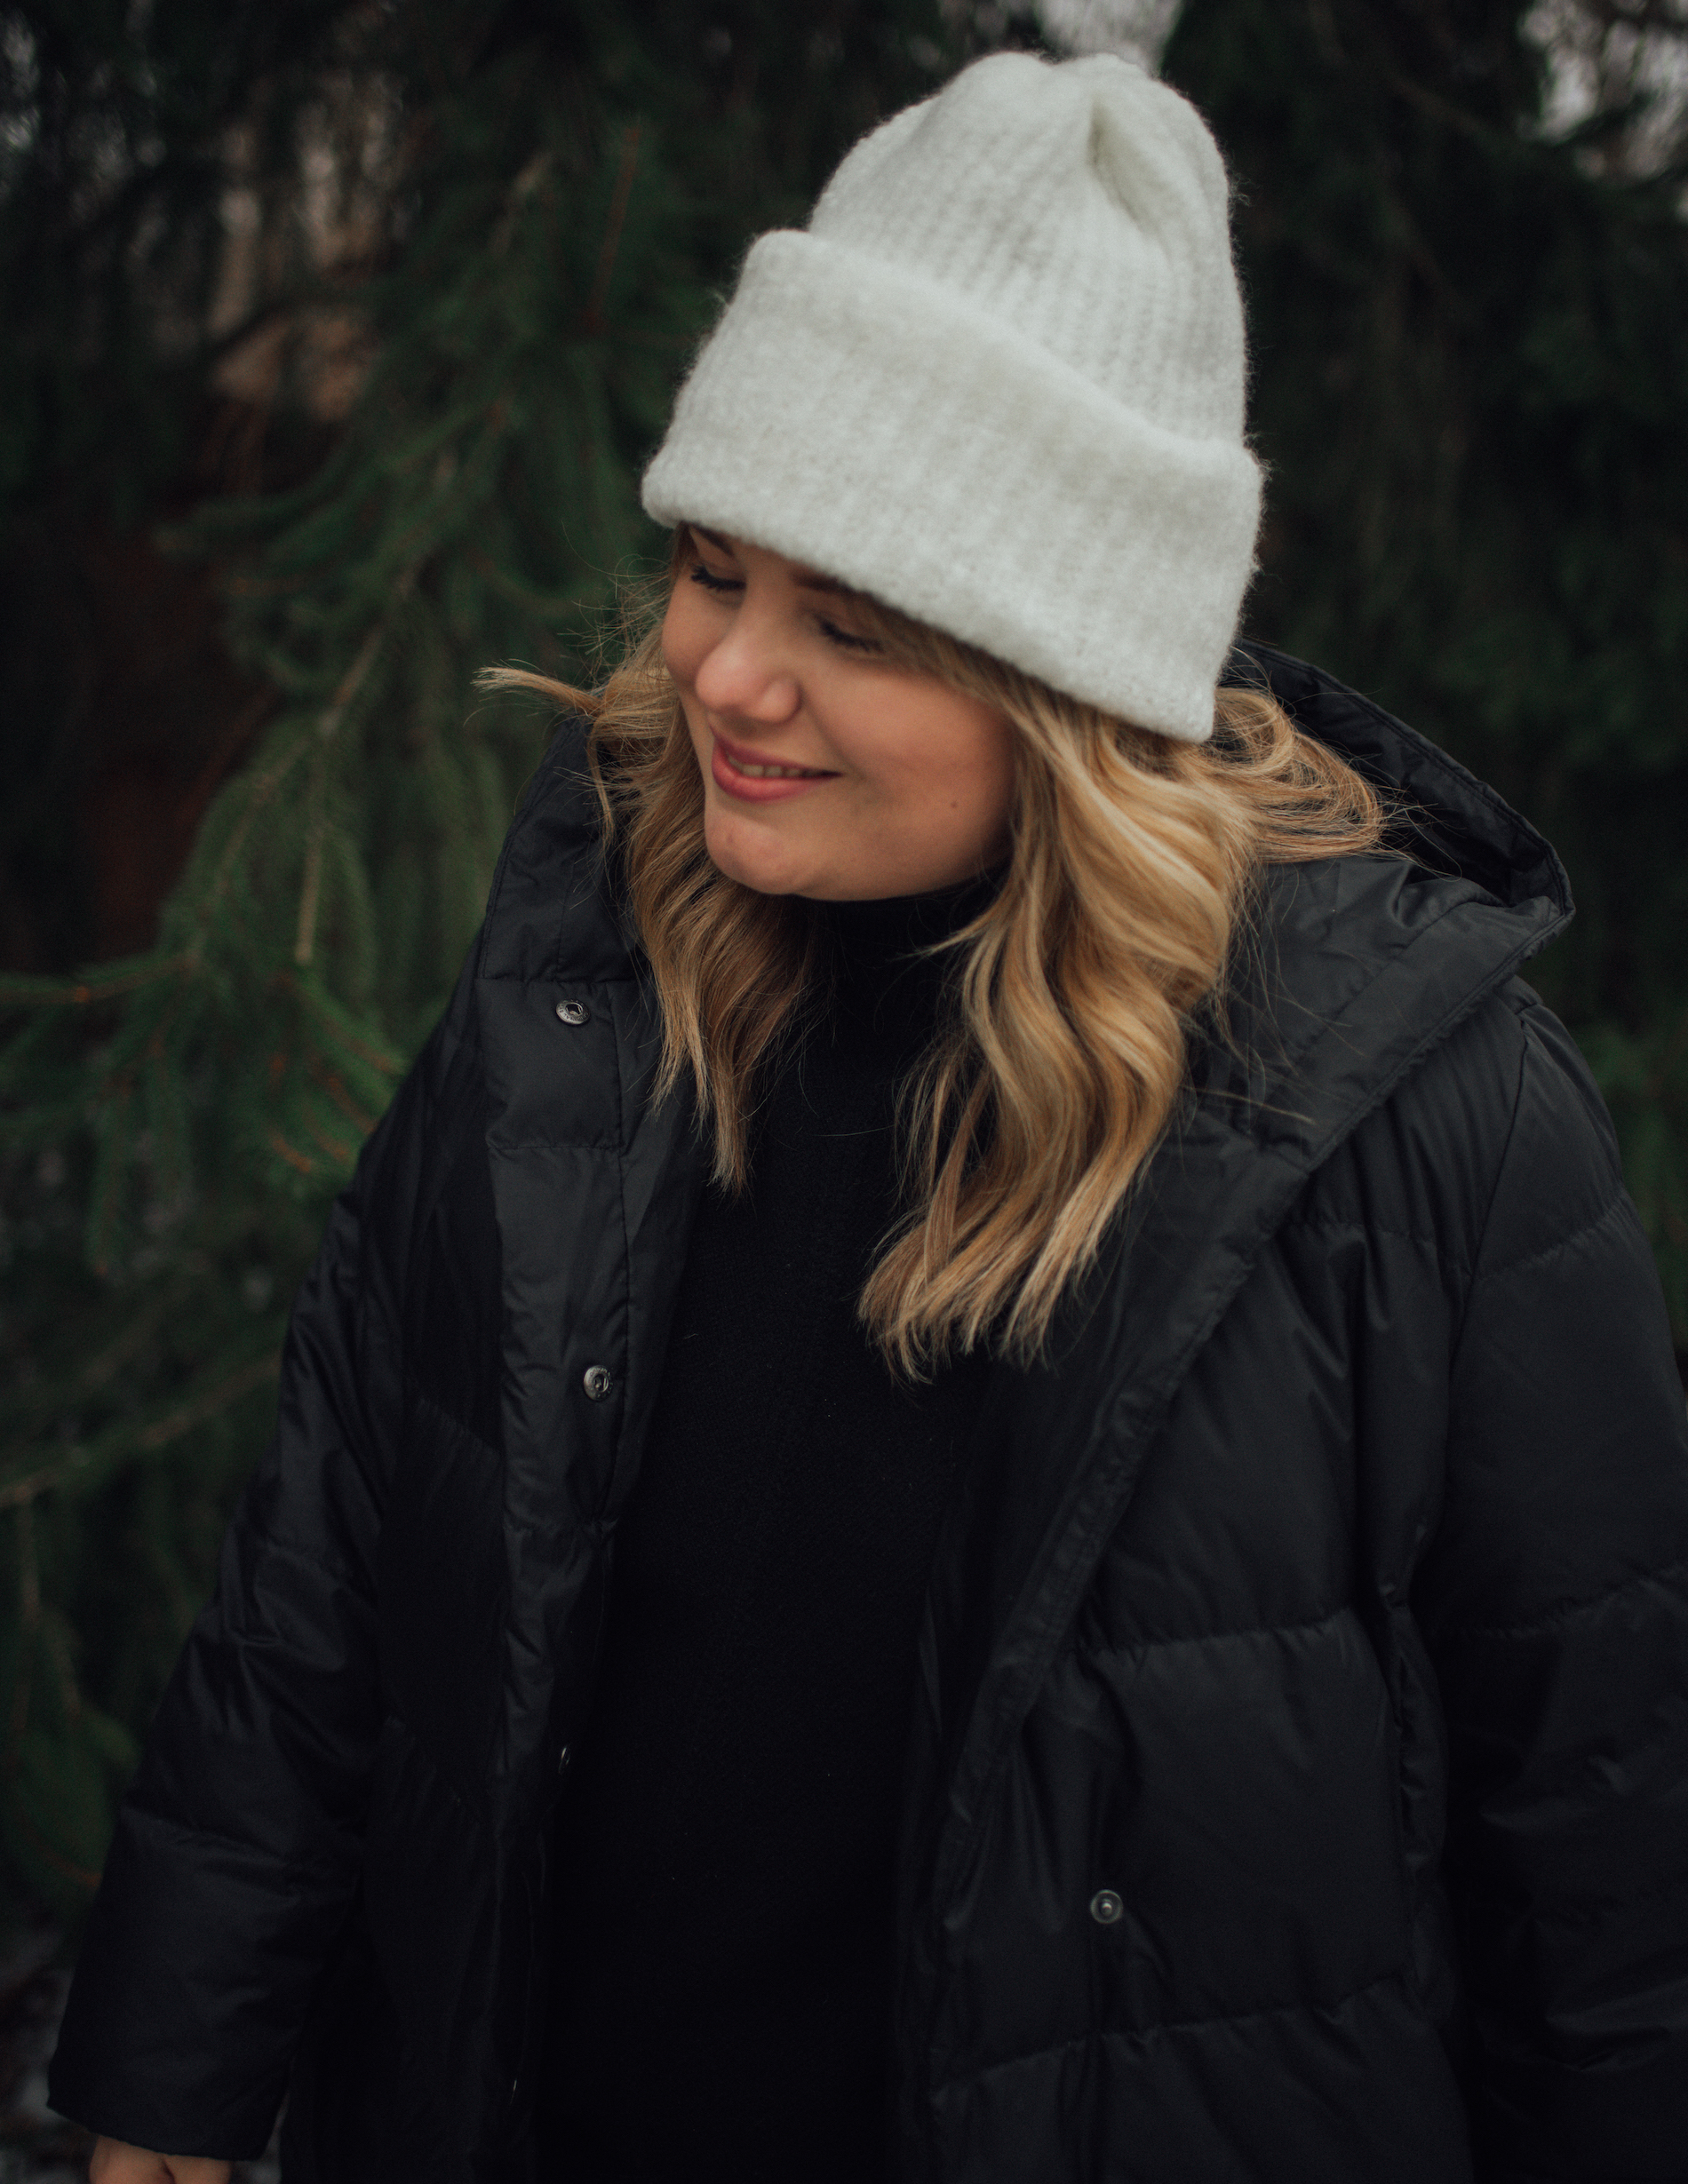 Warm Plus Size Outerwear. Sharing some extra warm plus size coats perfect for midwest winters. Grab your hats and boots too! 